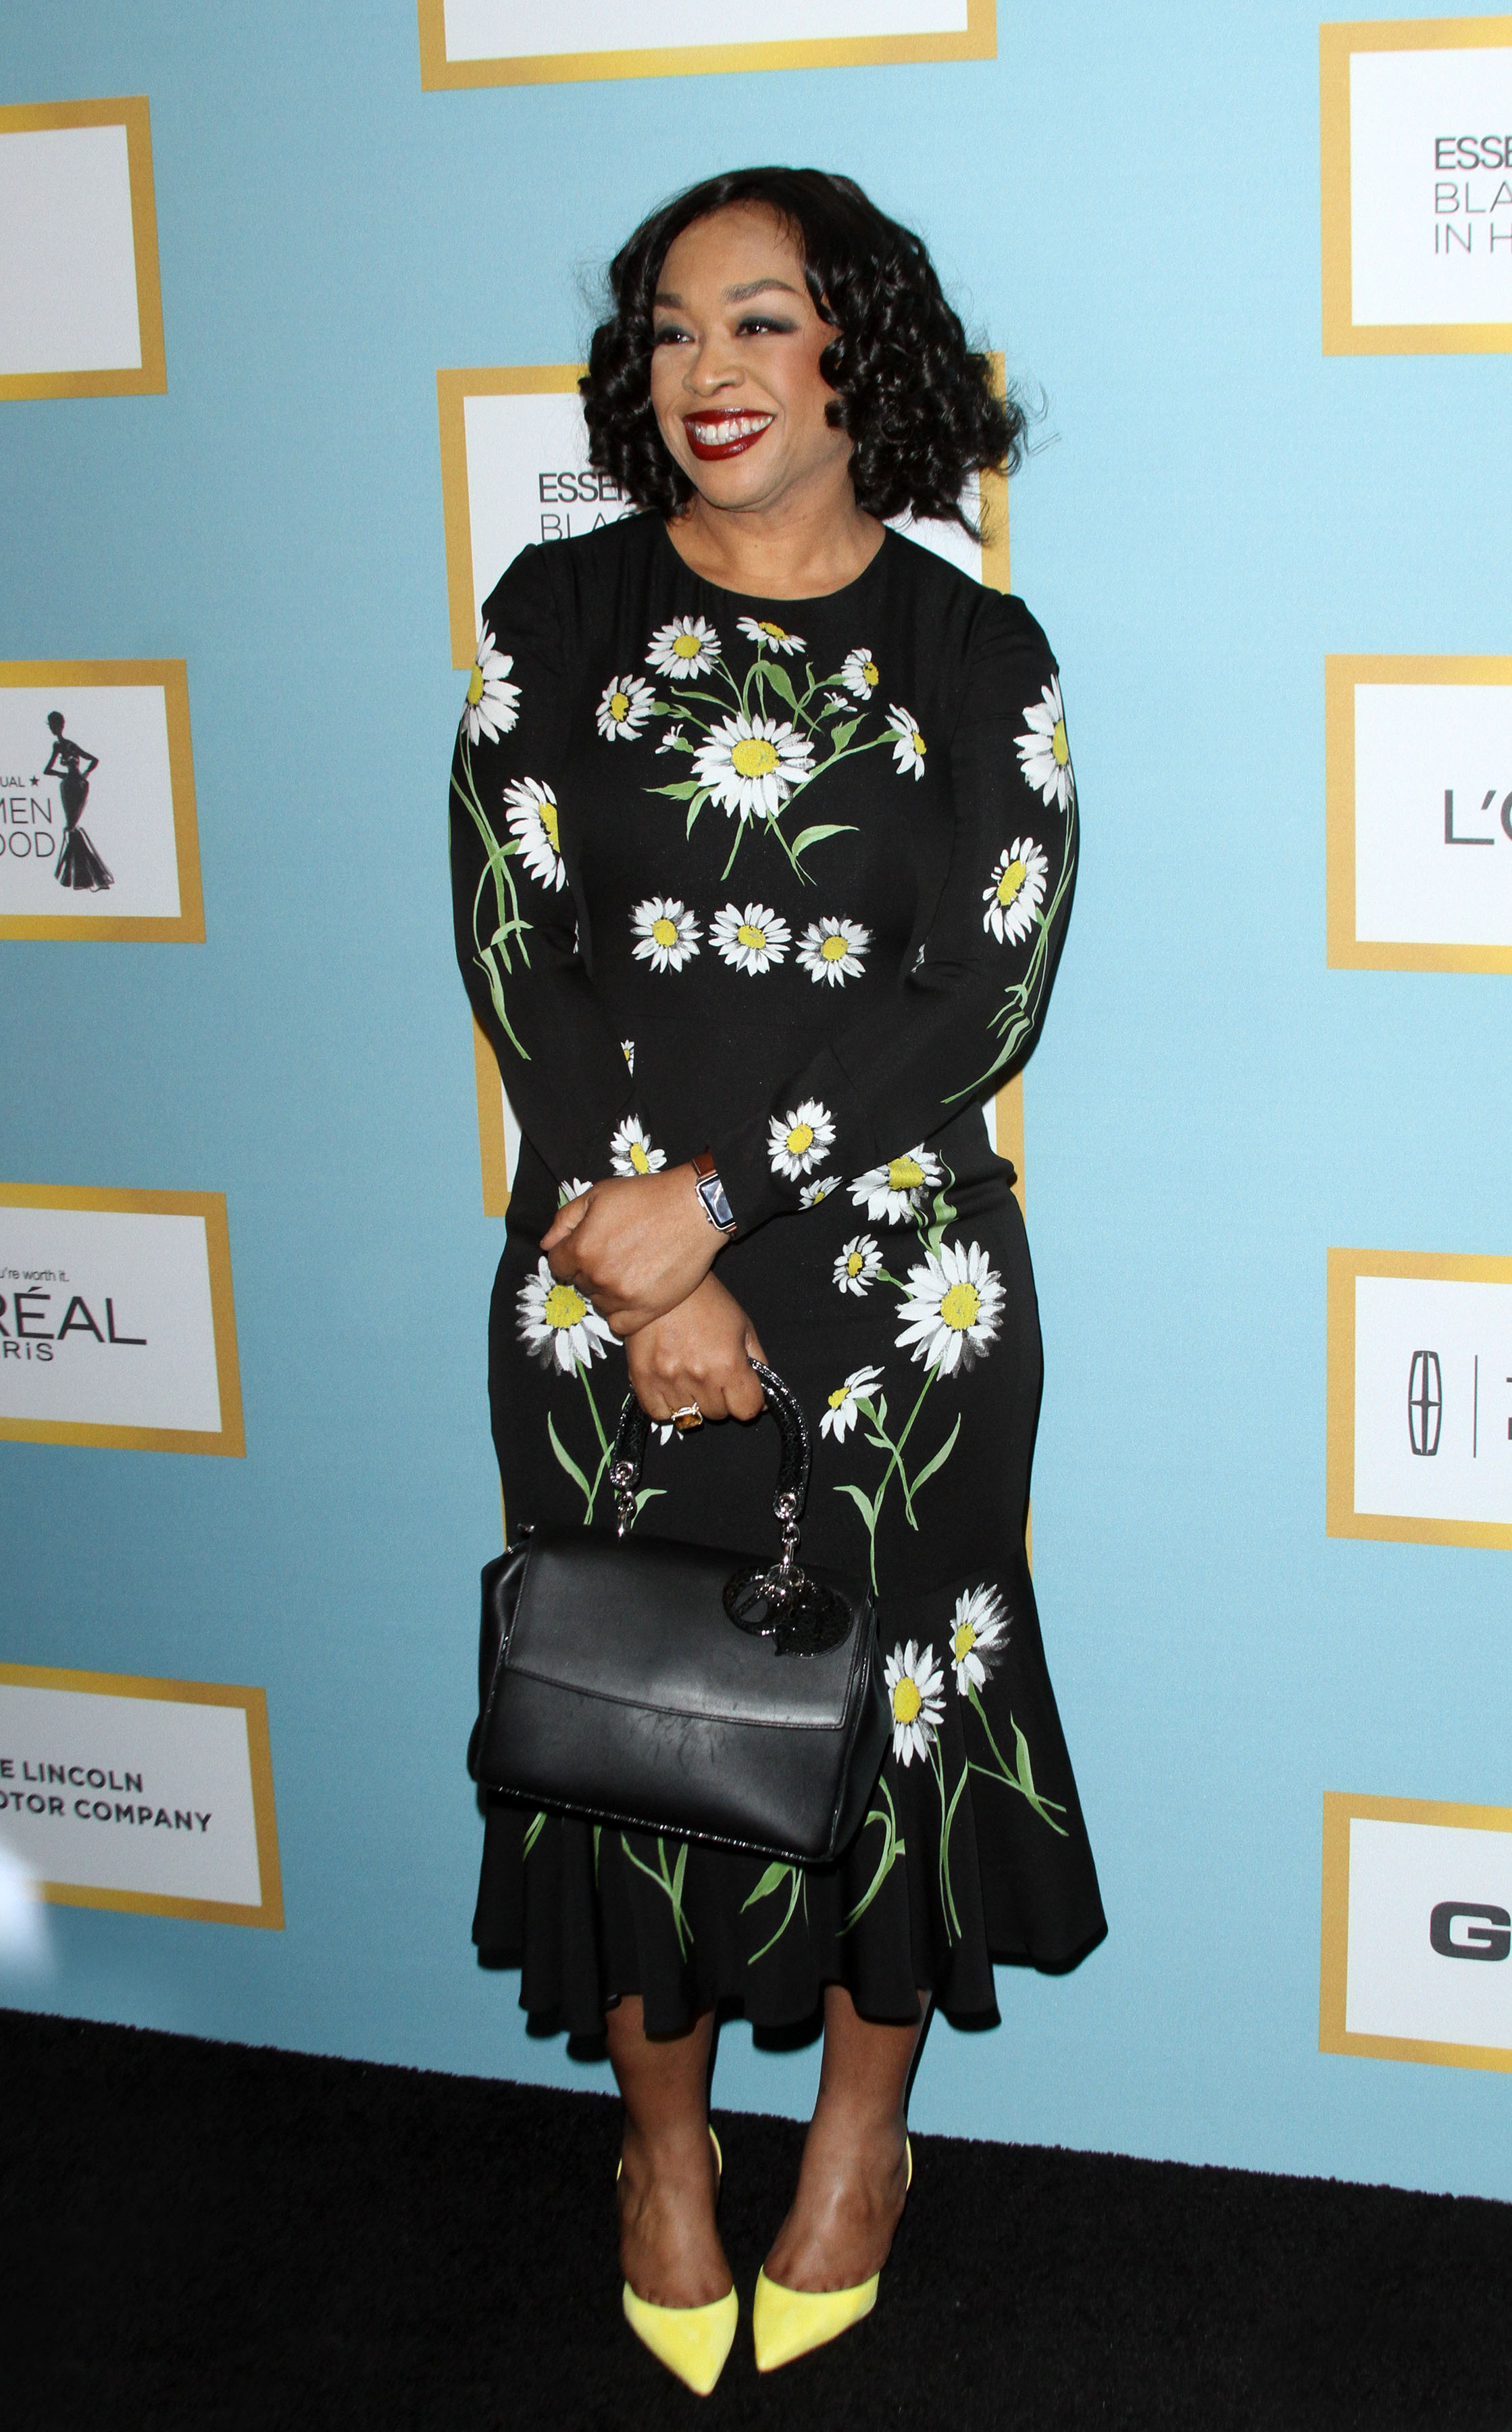 9th Annual Essence Black Women In Hollywood Luncheon 2016 held at the Beverly Wilshire Hotel in Beverly Hills Featuring: Shonda Rhimes Where: Los Angeles, California, United States When: 25 Feb 2016 Credit: Adriana M. Barraza/WENN.com